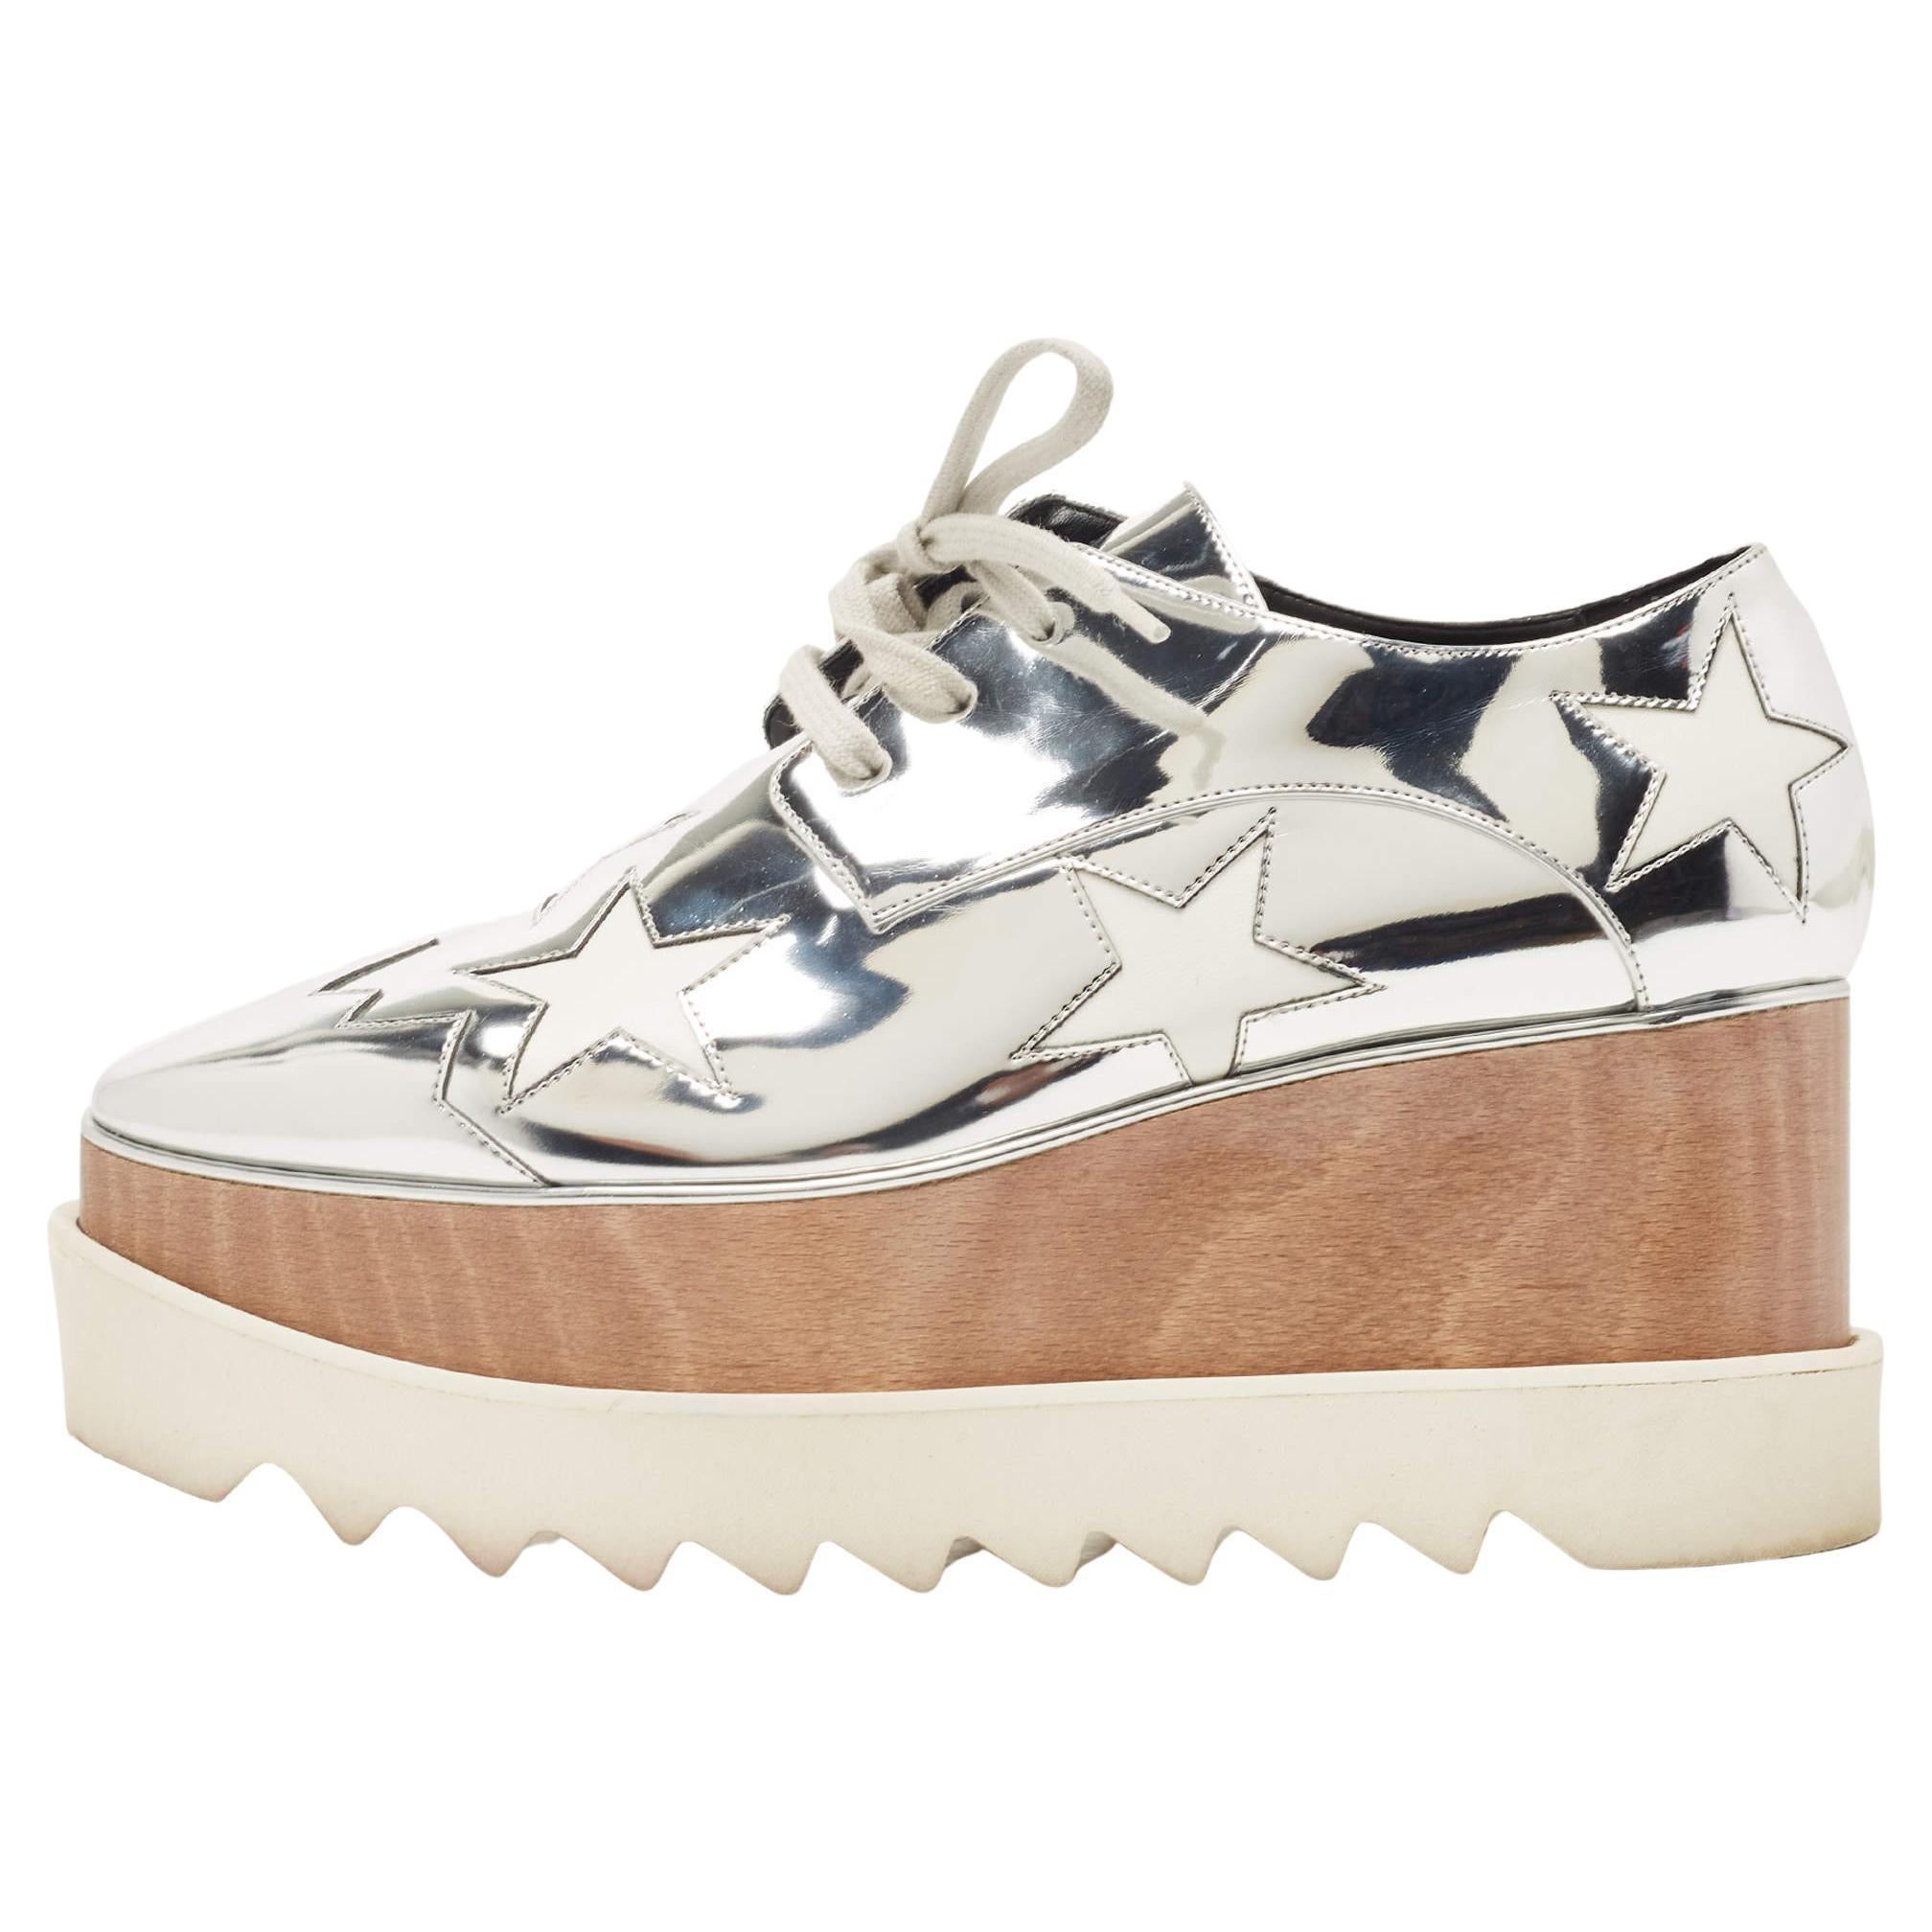 Stella McCartney Silver Faux Leather Elyse Star Wedge Sneakers Size 38